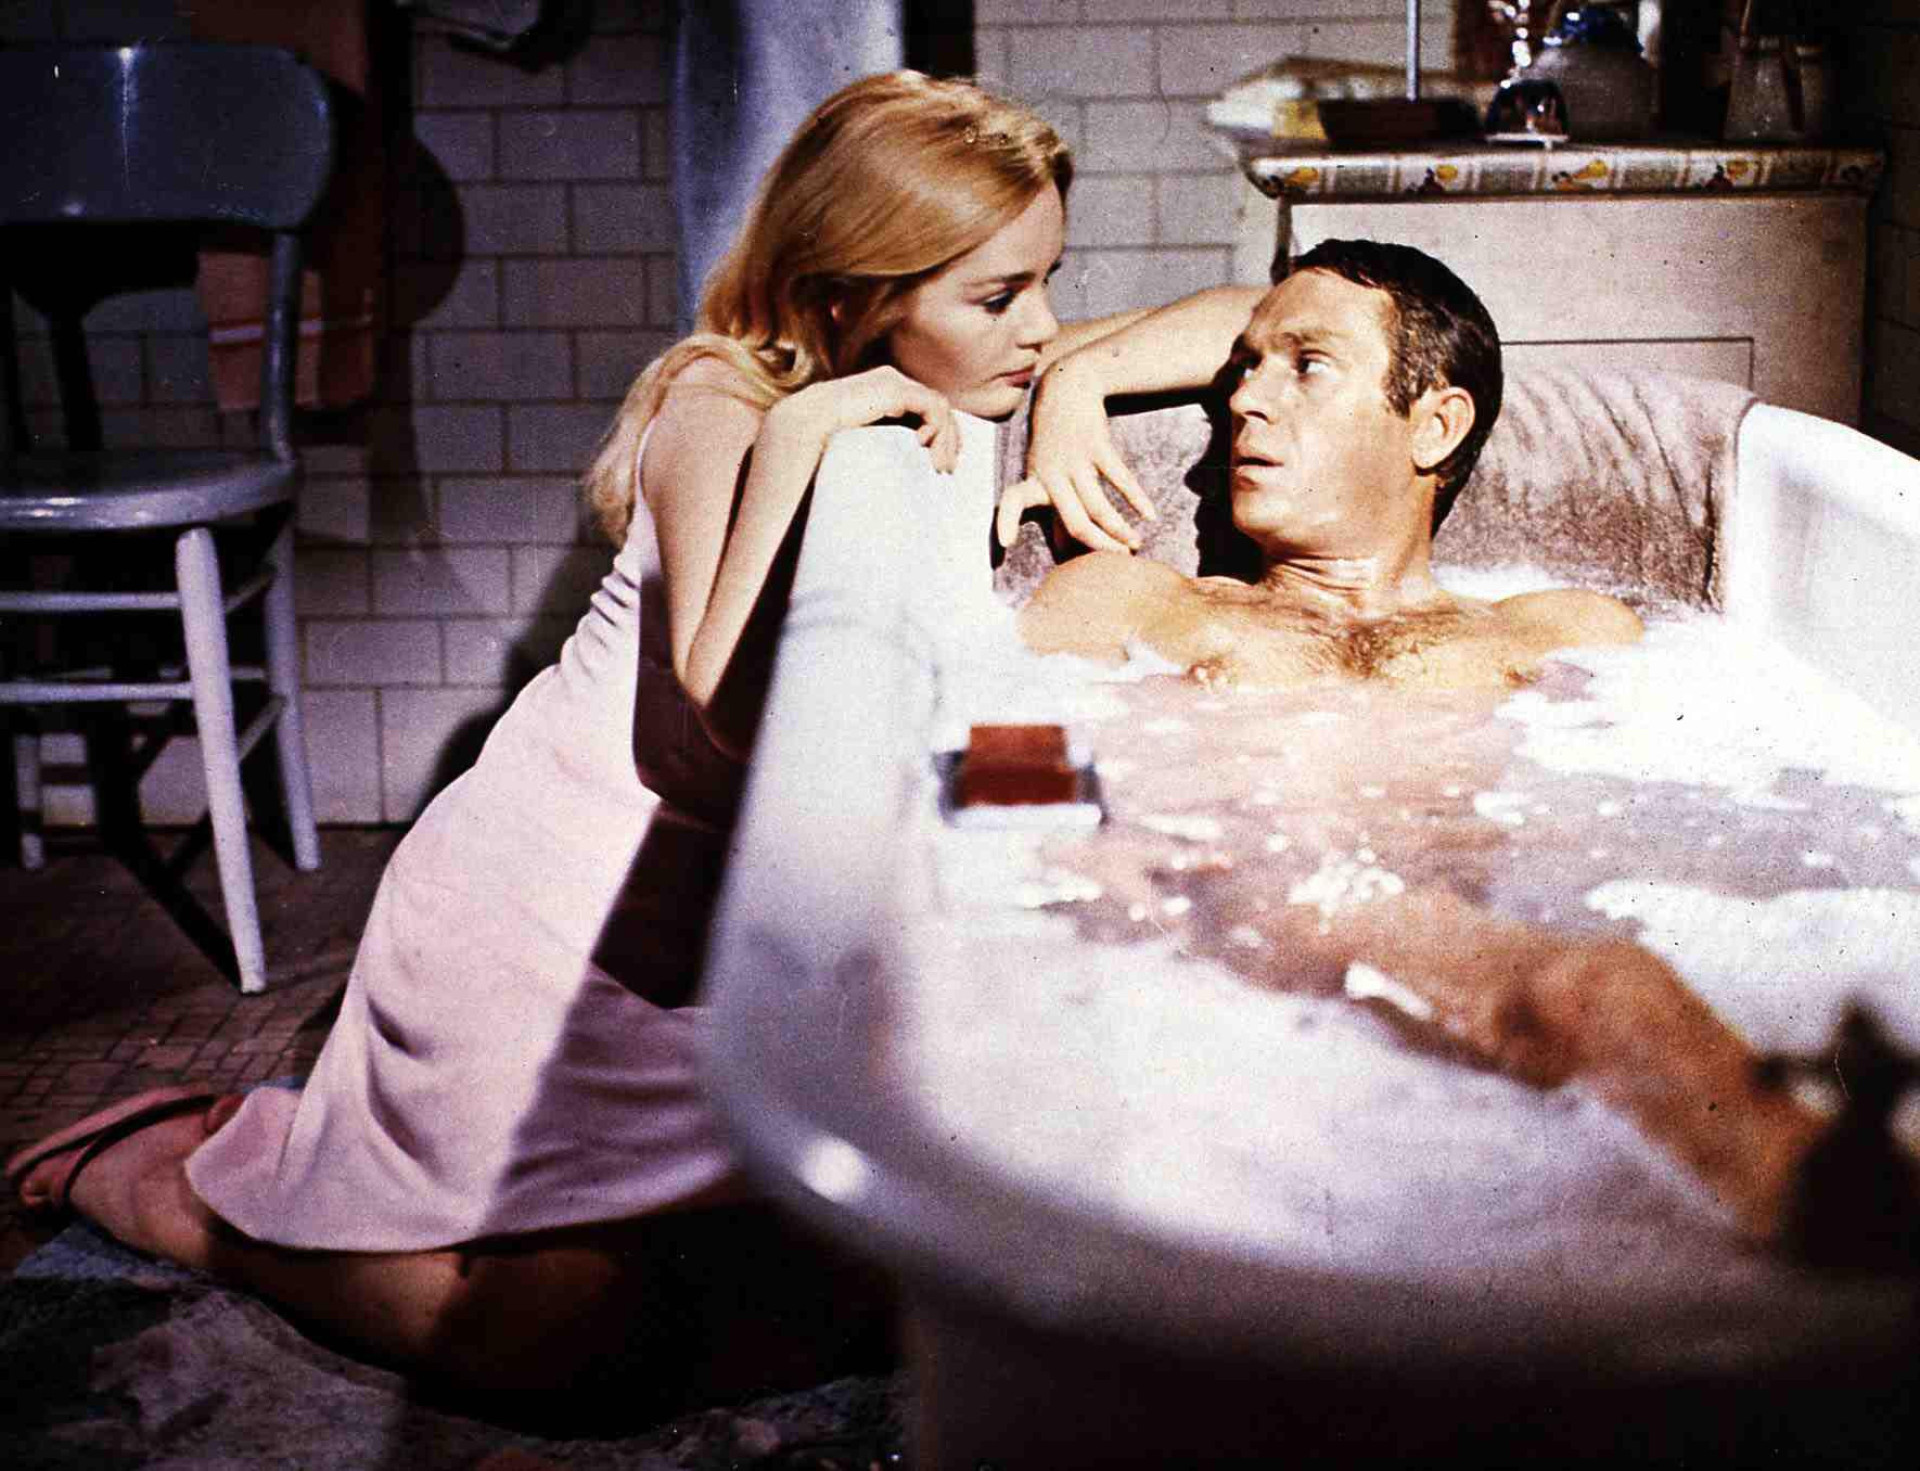 <p>Eric Stoner, the "Cincinnati Kid," played by Steve McQueen, relaxes in the tub while wooing Tuesday Weld between rounds of poker in this well-received drama.</p><p><a href="https://www.msn.com/en-us/community/channel/vid-7xx8mnucu55yw63we9va2gwr7uihbxwc68fxqp25x6tg4ftibpra?cvid=94631541bc0f4f89bfd59158d696ad7e">Follow us and access great exclusive content every day</a></p>